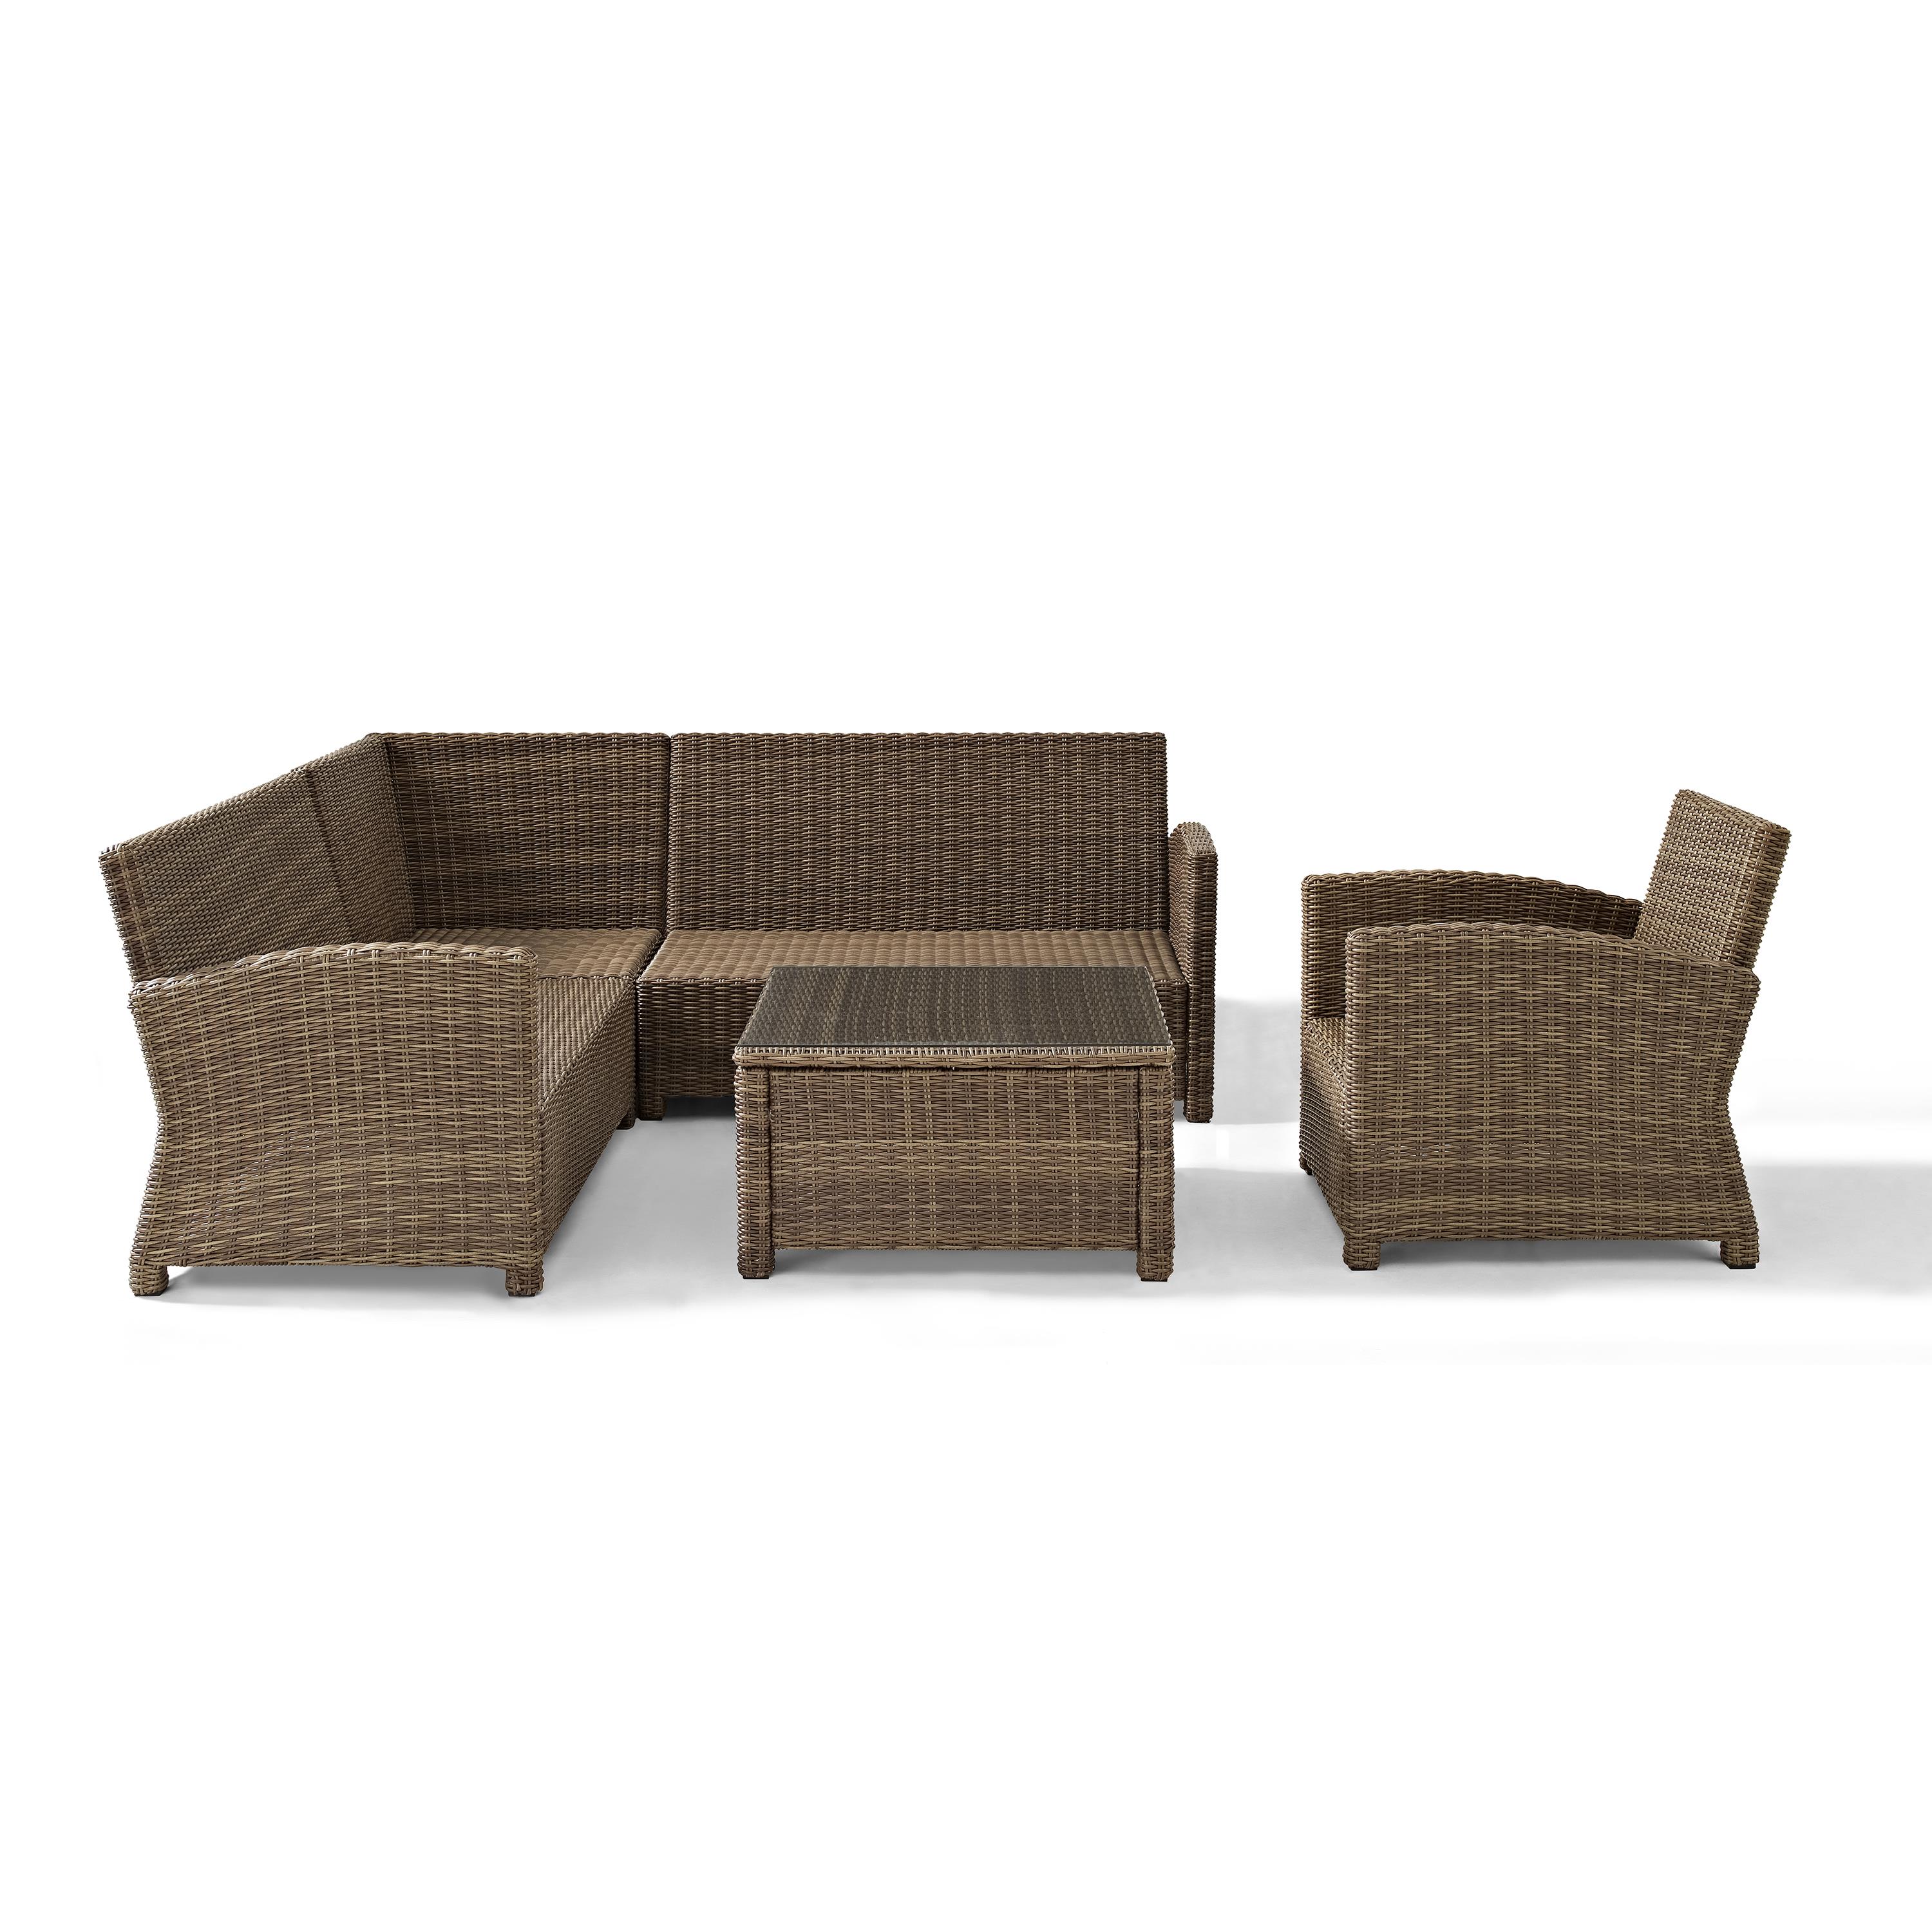 Crosley Furniture Bradenton 5 Pc Fabric Patio Sectional Set in Sangria Red - image 4 of 10